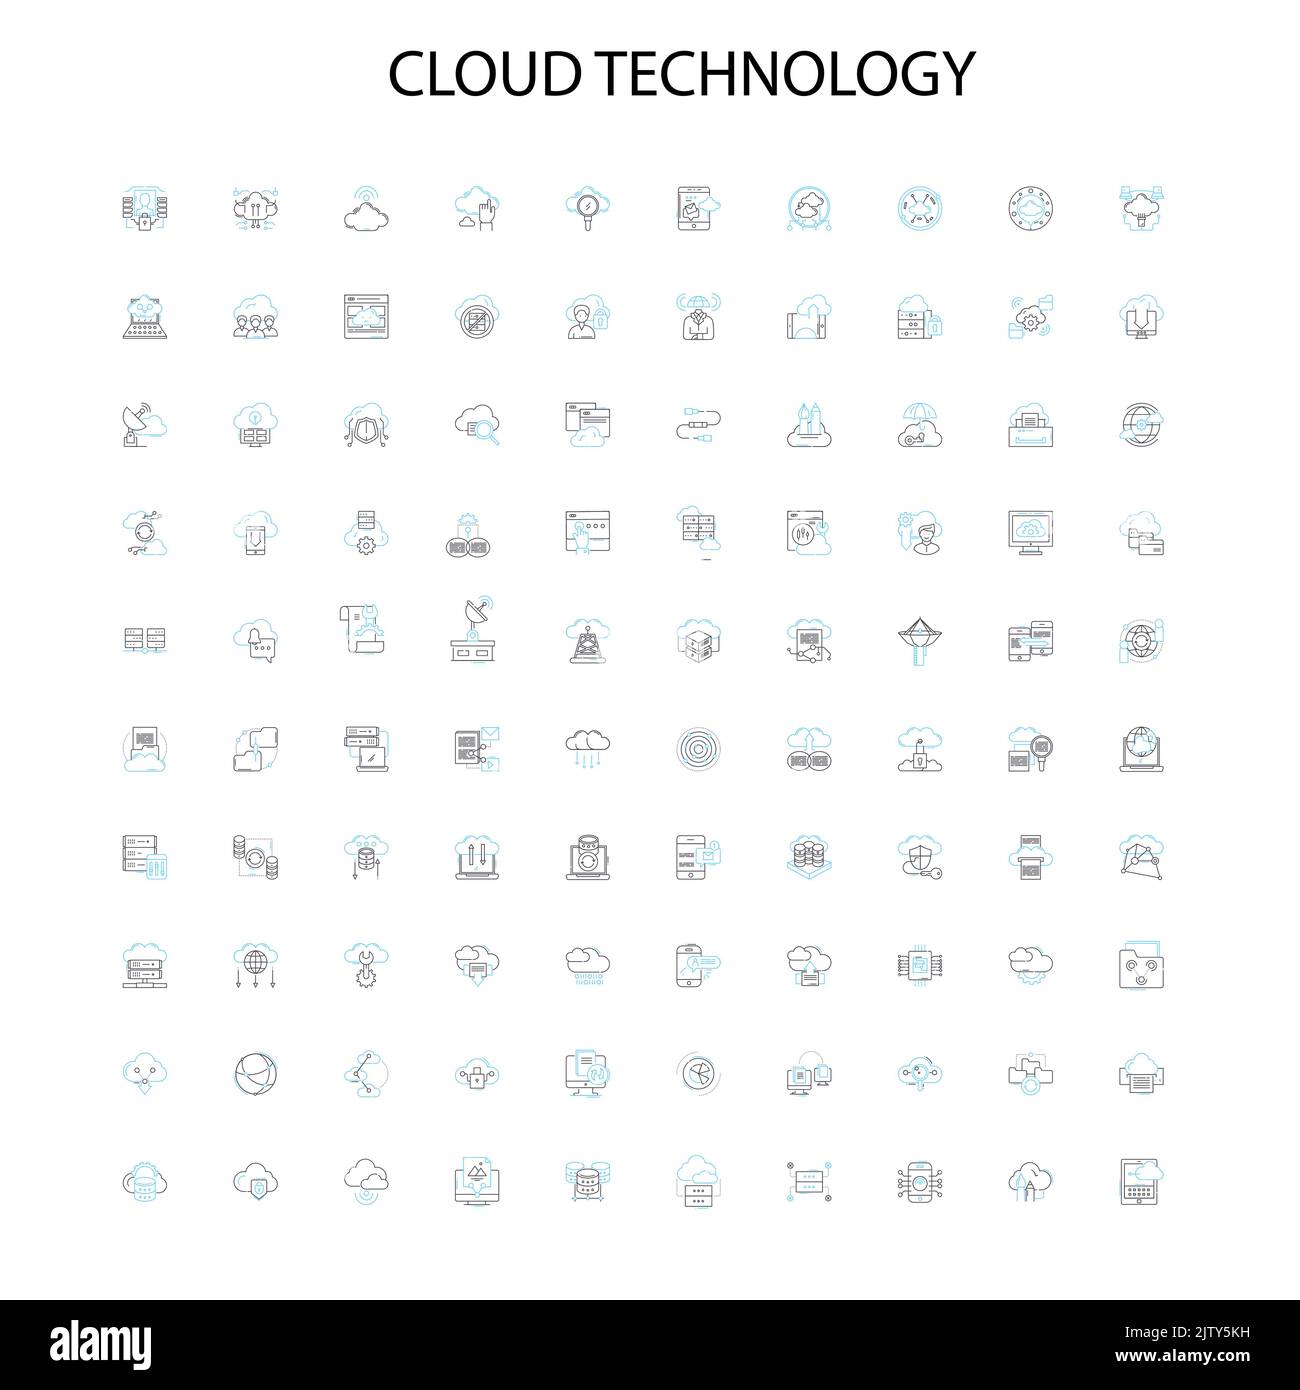 cloud technology icons, signs, outline symbols, concept linear illustration line collection Stock Vector